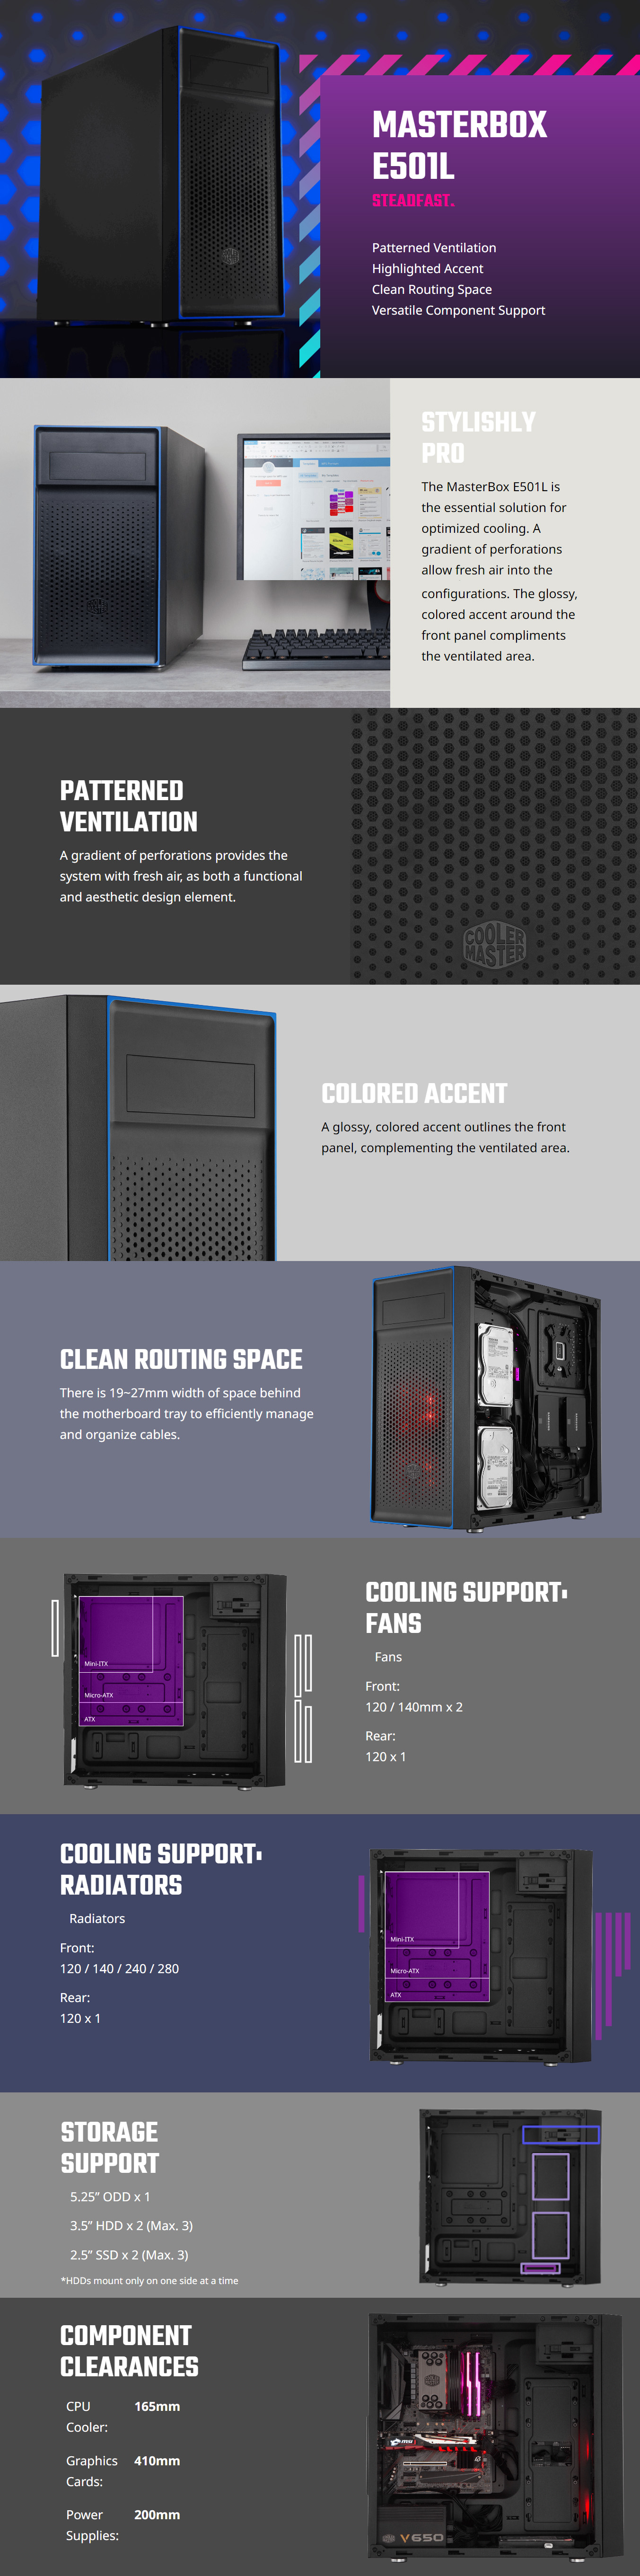 Cooler-Master-Cases-Cooler-Master-MasterBox-E501L-Mid-Tower-ATX-Case-1